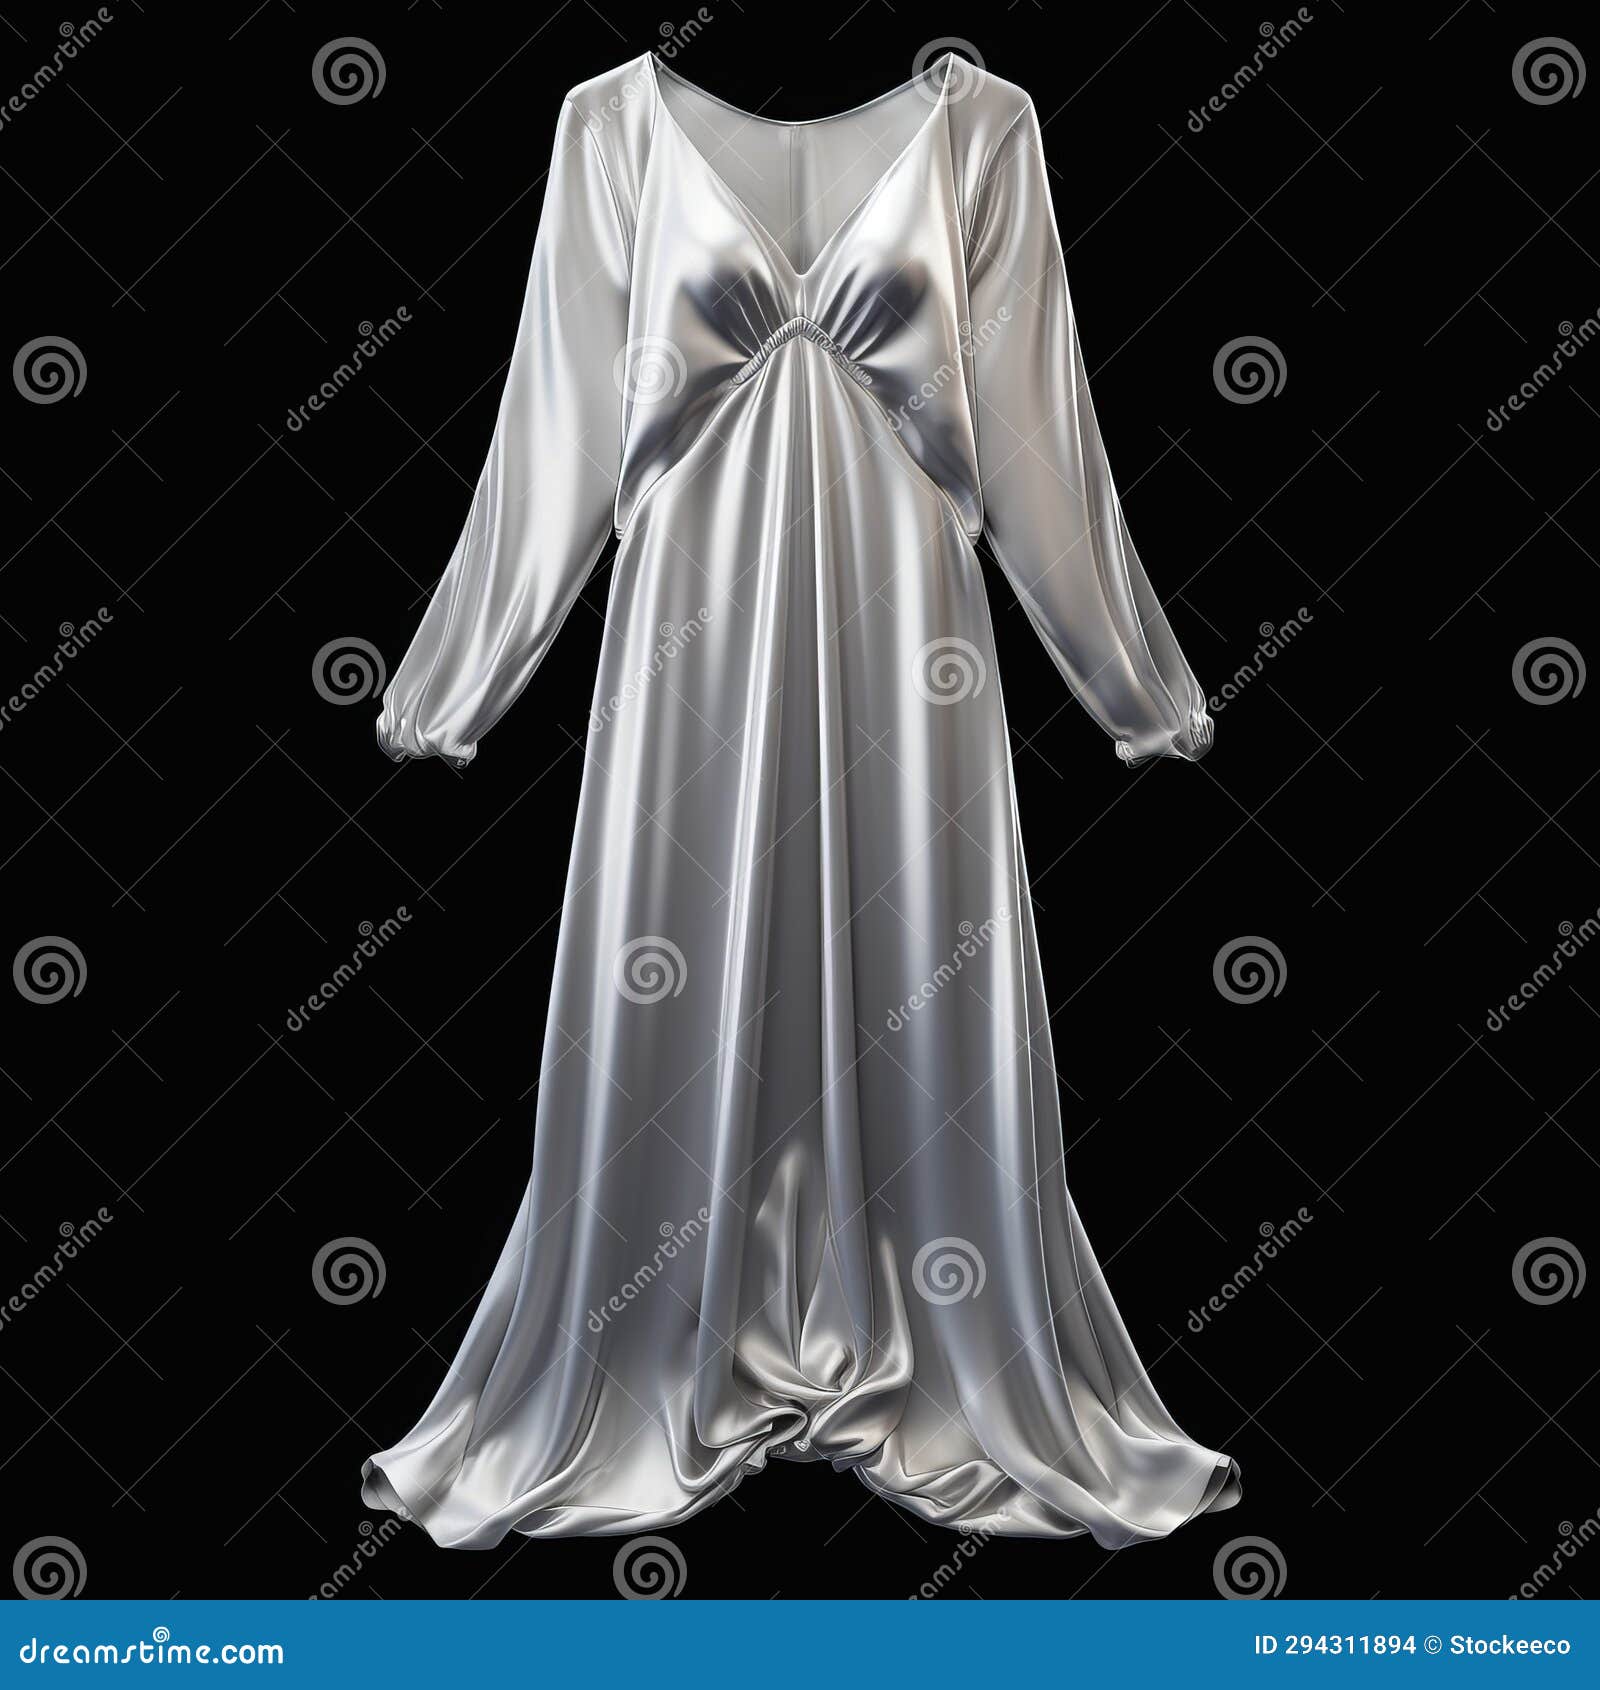 hyper realistic silver long gown on black background